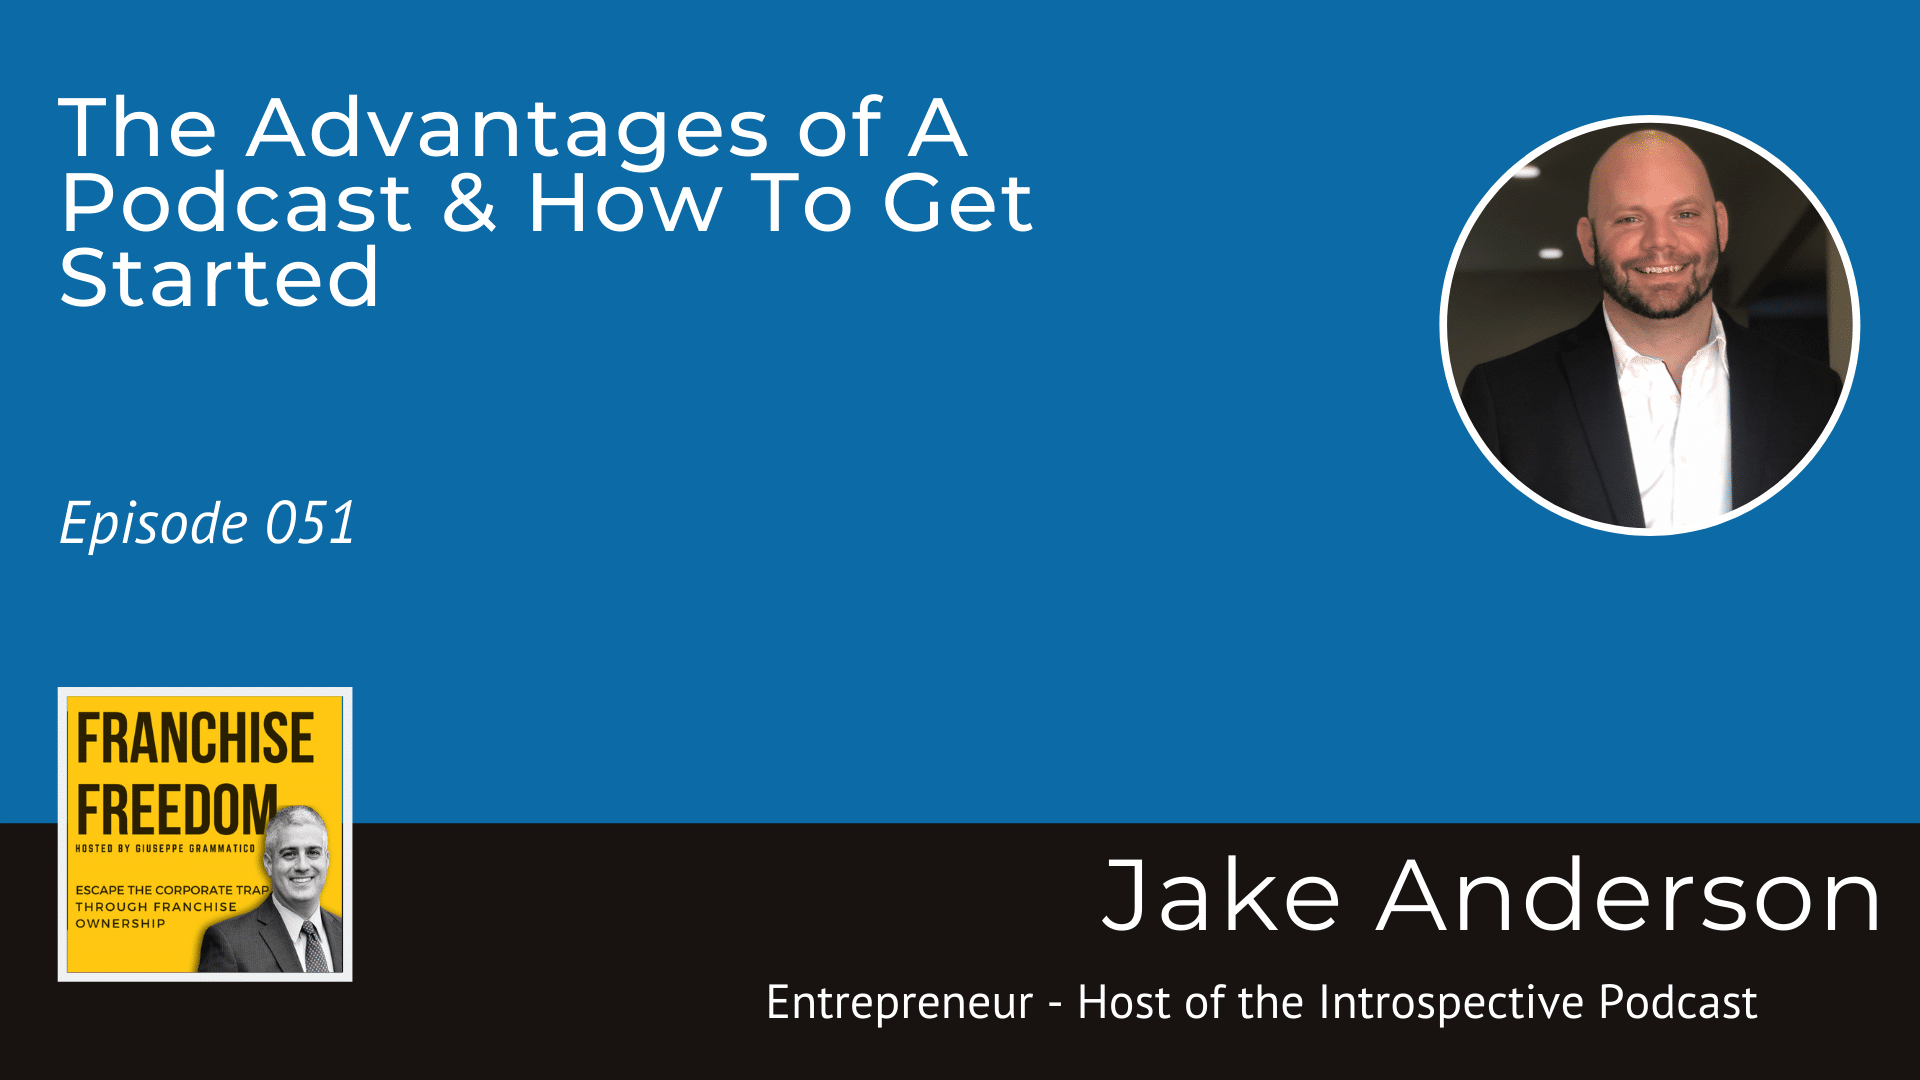 Starting a business podcast